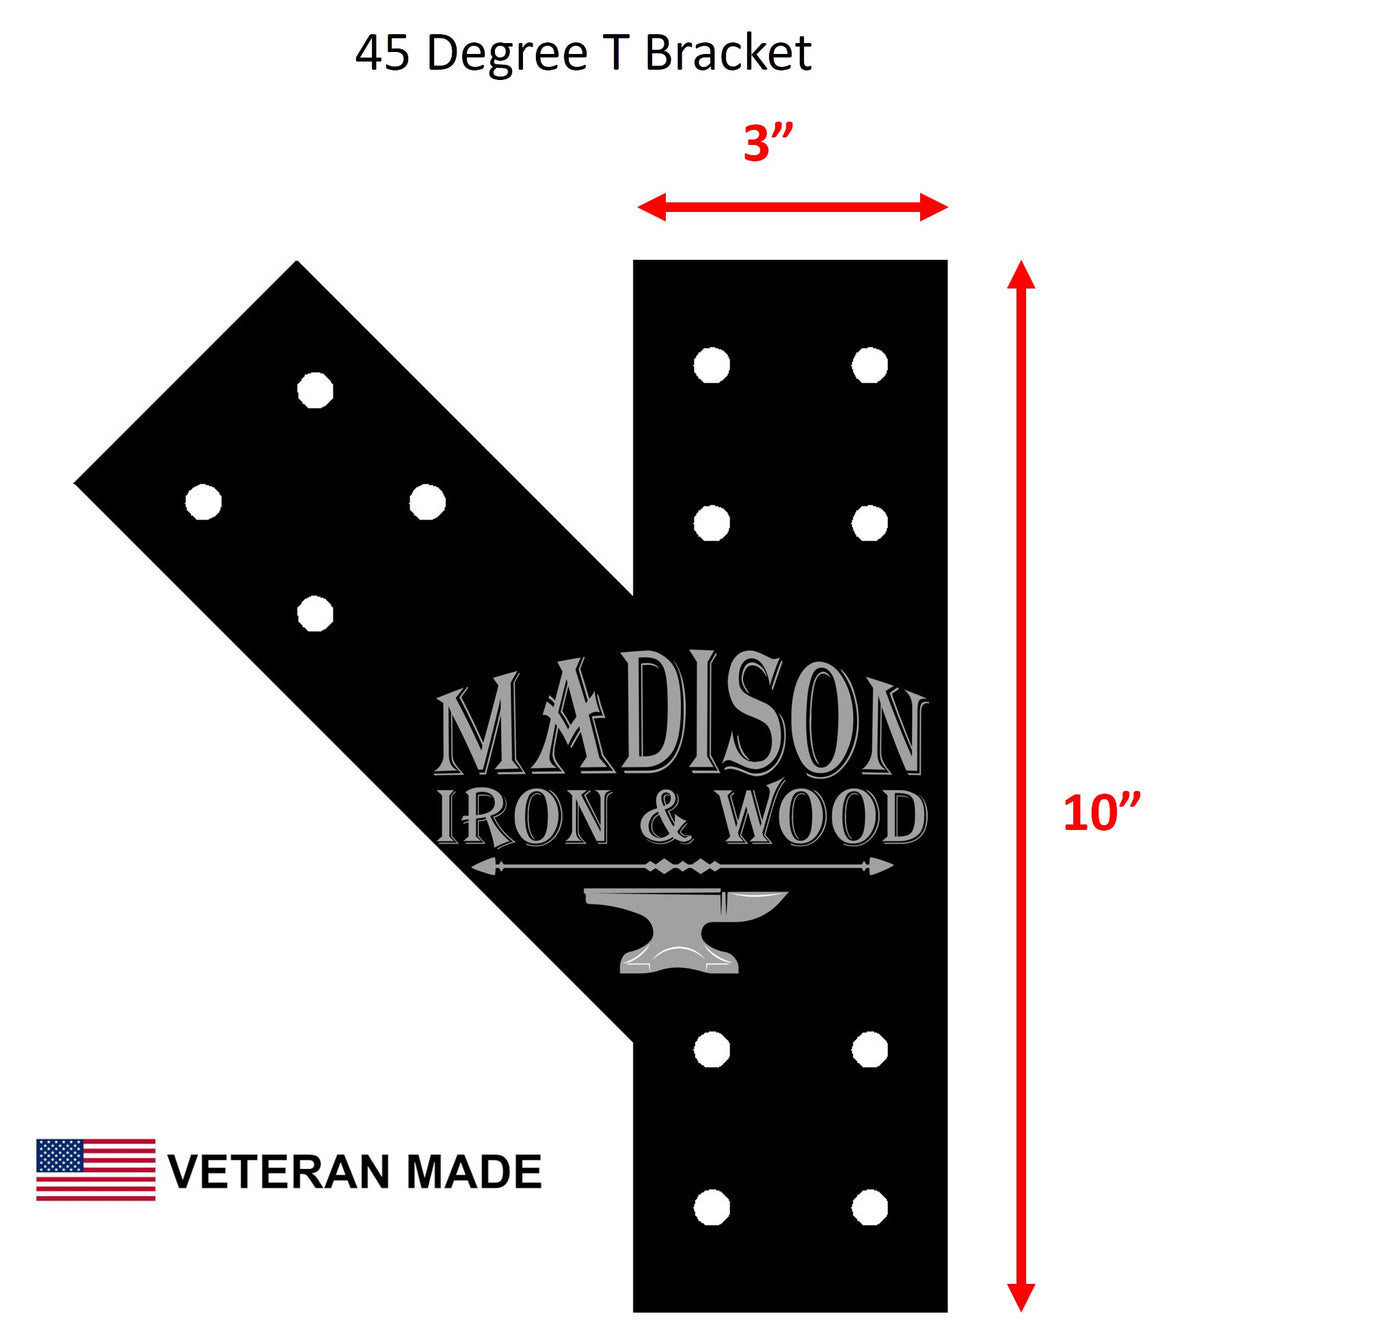 45 Degree T Bracket for 4" Post - Madison Iron and Wood - Brackets - metal outdoor decor - Steel deocrations - american made products - veteran owned business products - fencing decorations - fencing supplies - custom wall decorations - personalized wall signs - steel - decorative post caps - steel post caps - metal post caps - brackets - structural brackets - home improvement - easter - easter decorations - easter gift - easter yard decor